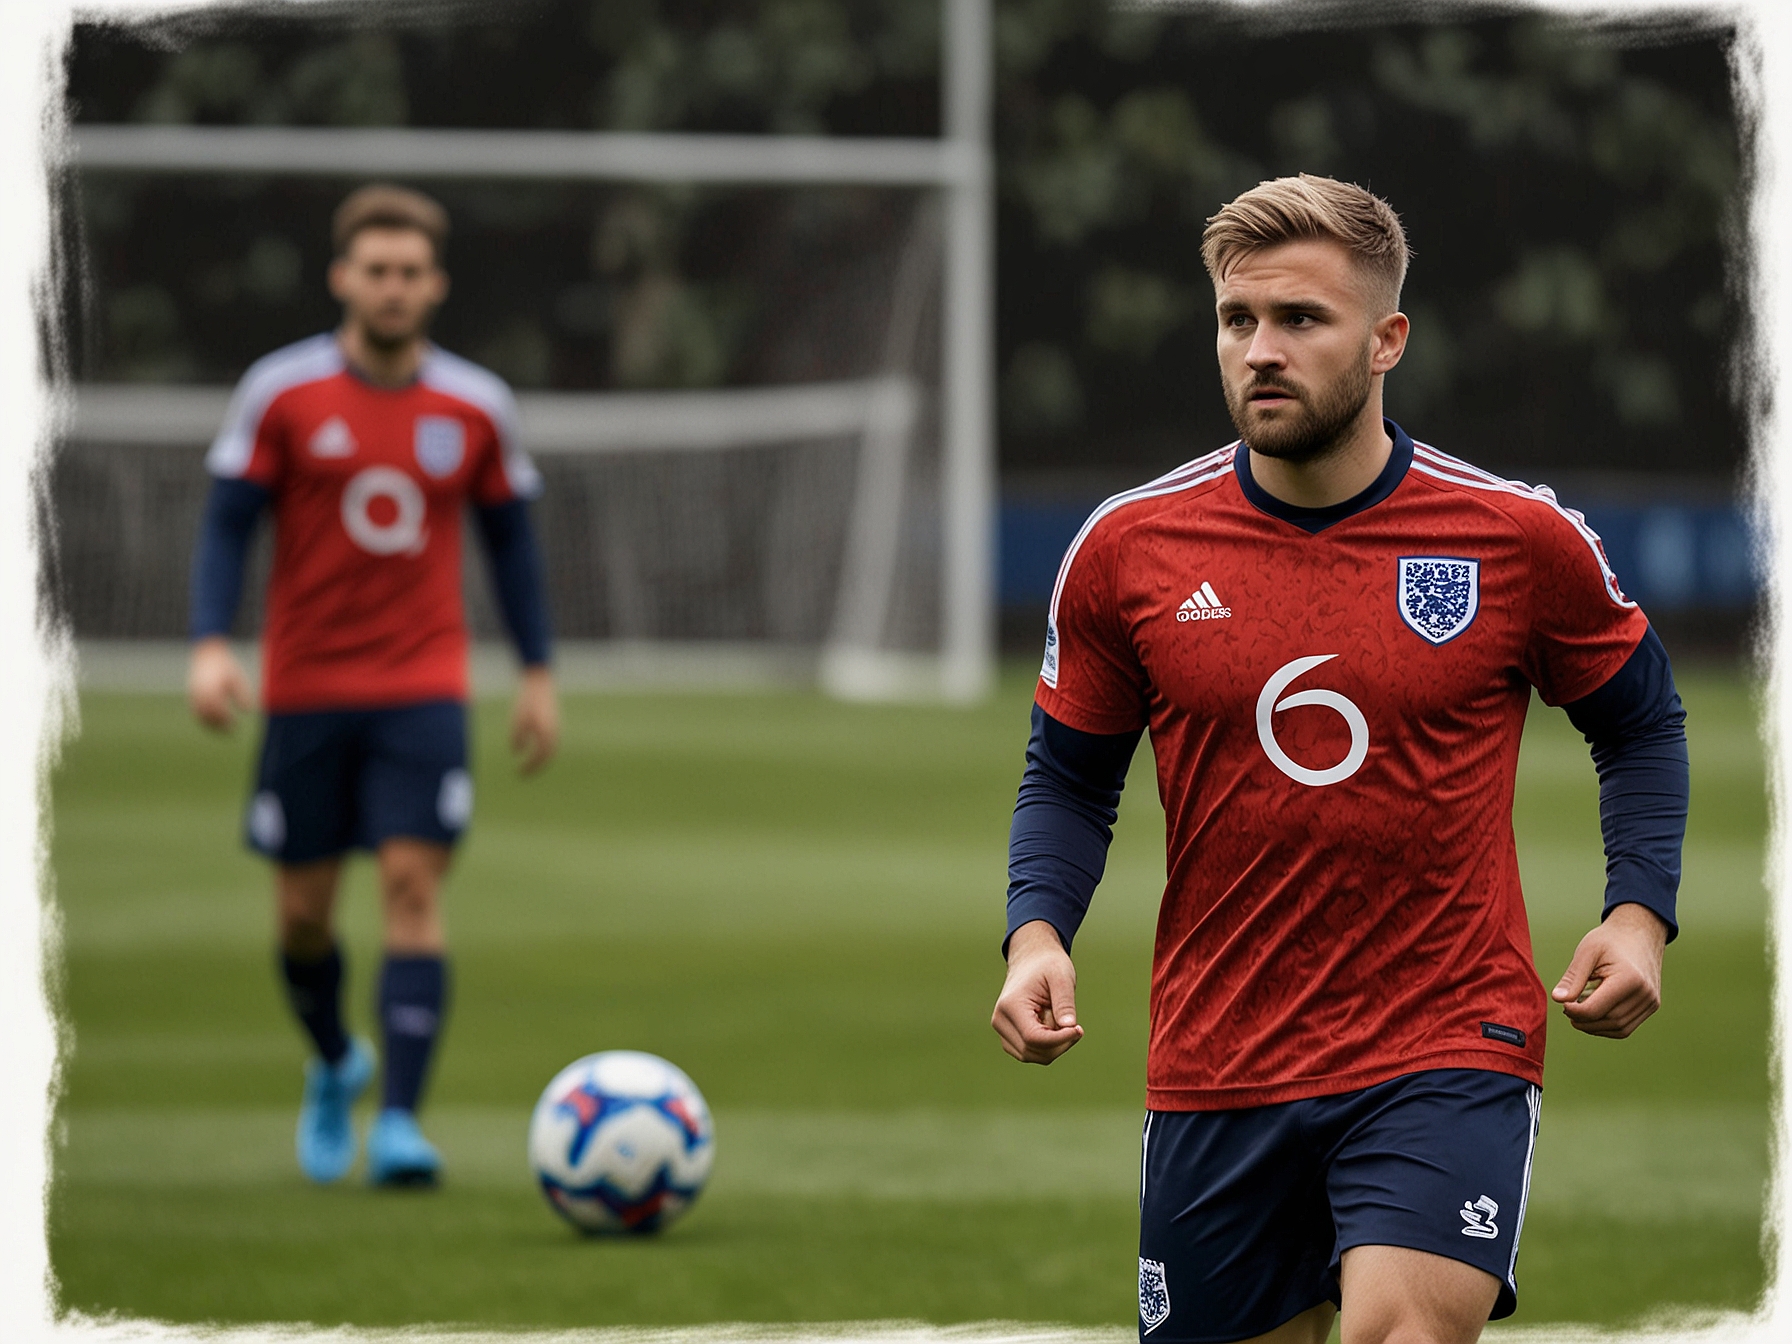 Luke Shaw actively participating in England’s training session after recovering from injury, boosting the squad’s morale and reinforcing the team’s defensive lineup.